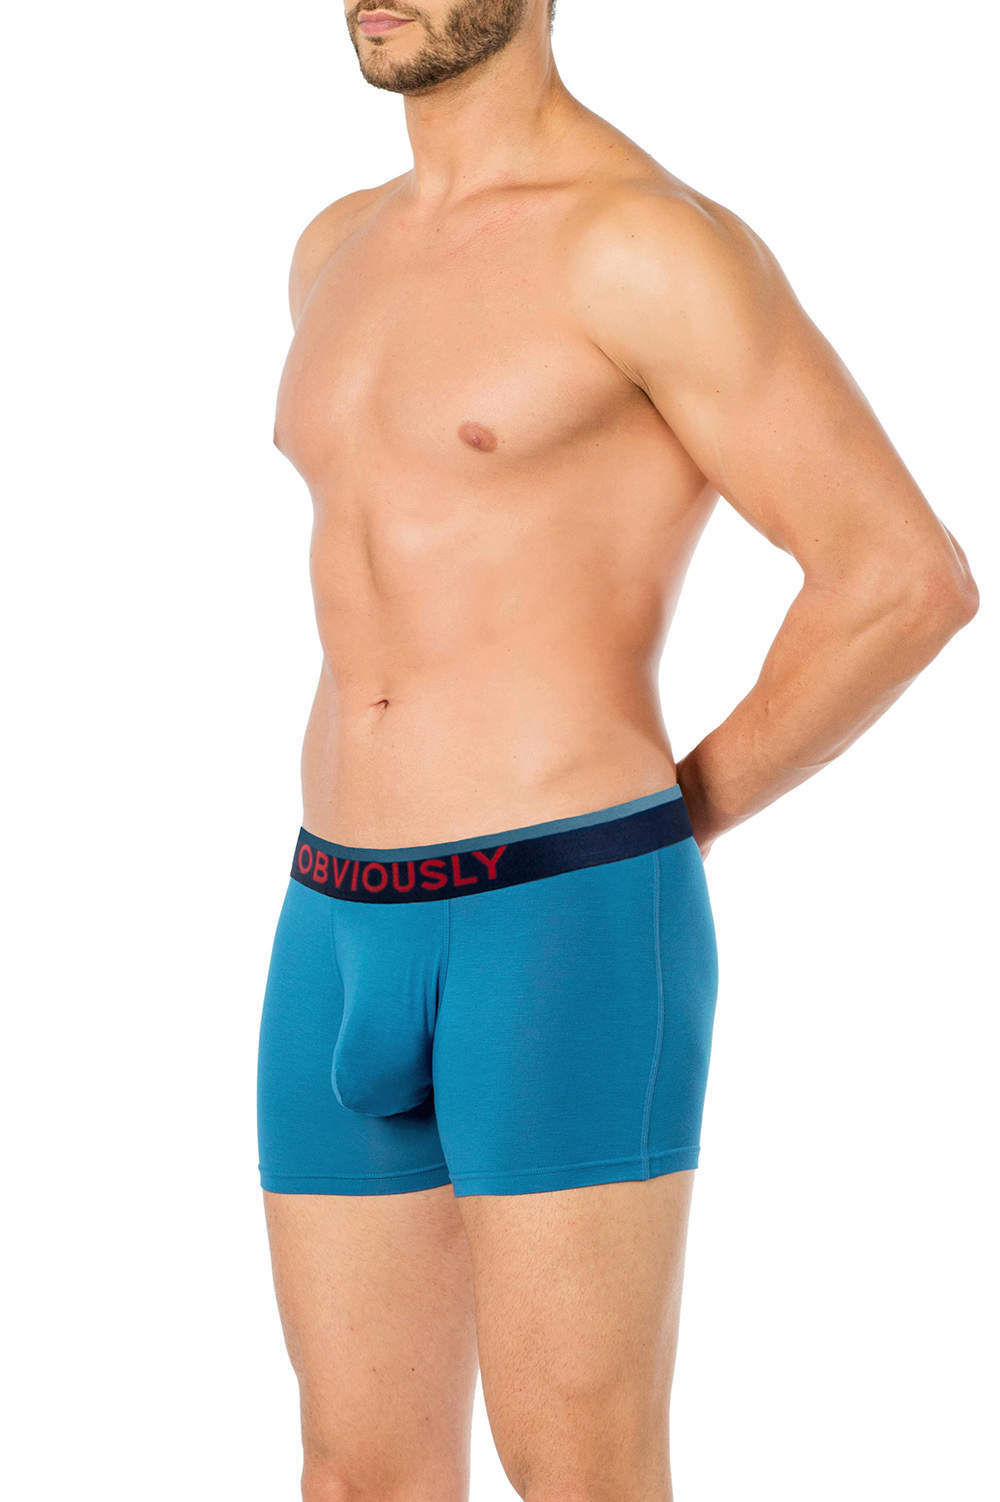 Obviously FreeMan - Boxer Brief 9 inch Leg - Black - Small at  Men's  Clothing store